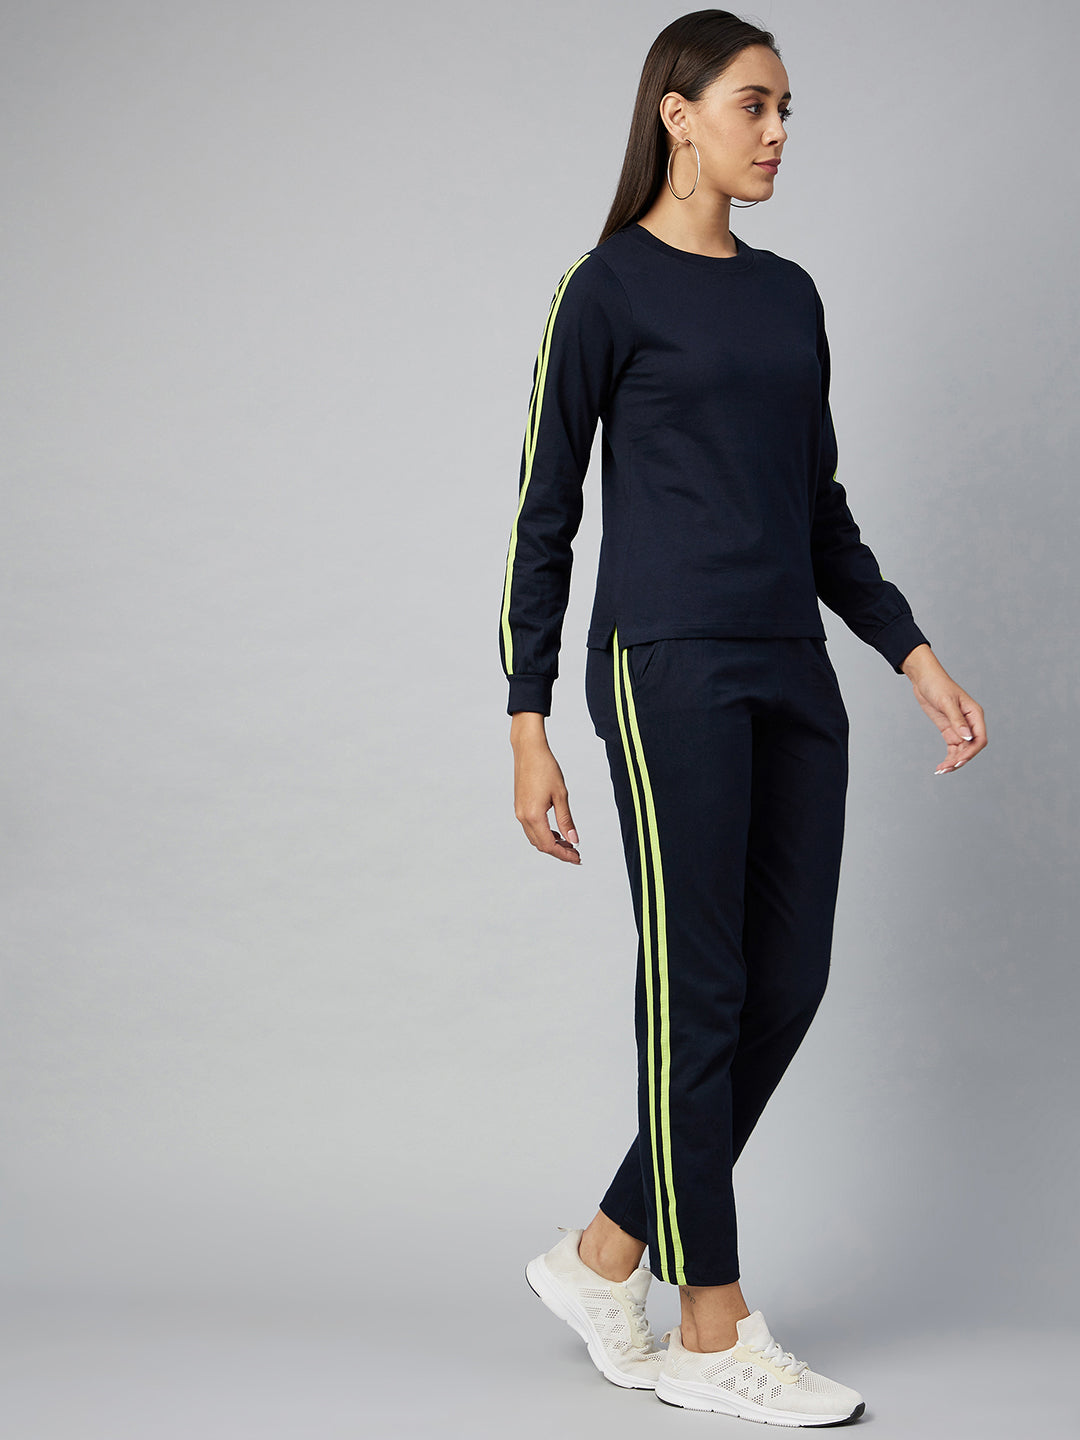 Women's Cotton Navy Blue Track Suit Set with Lime Green Stripe